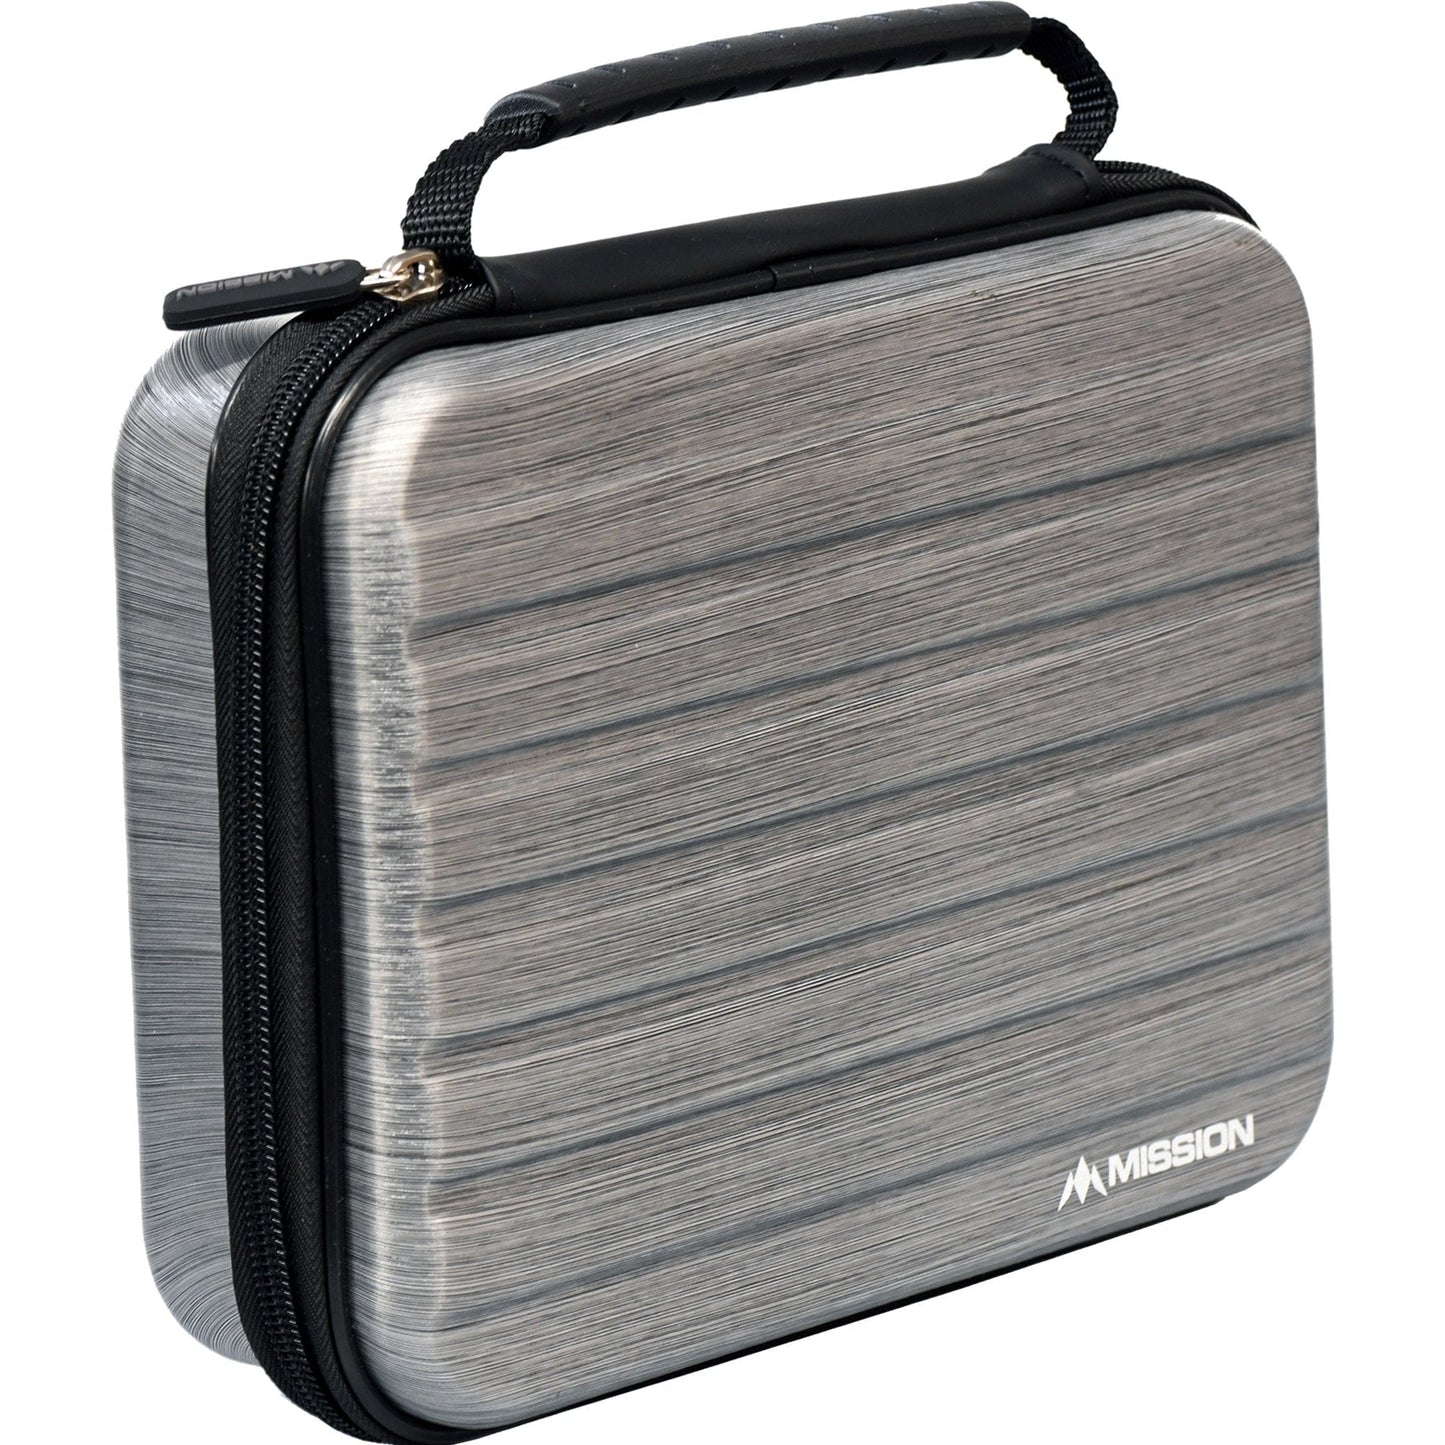 Mission ABS-4 Darts Case - Strong Protection - Metallic Silver